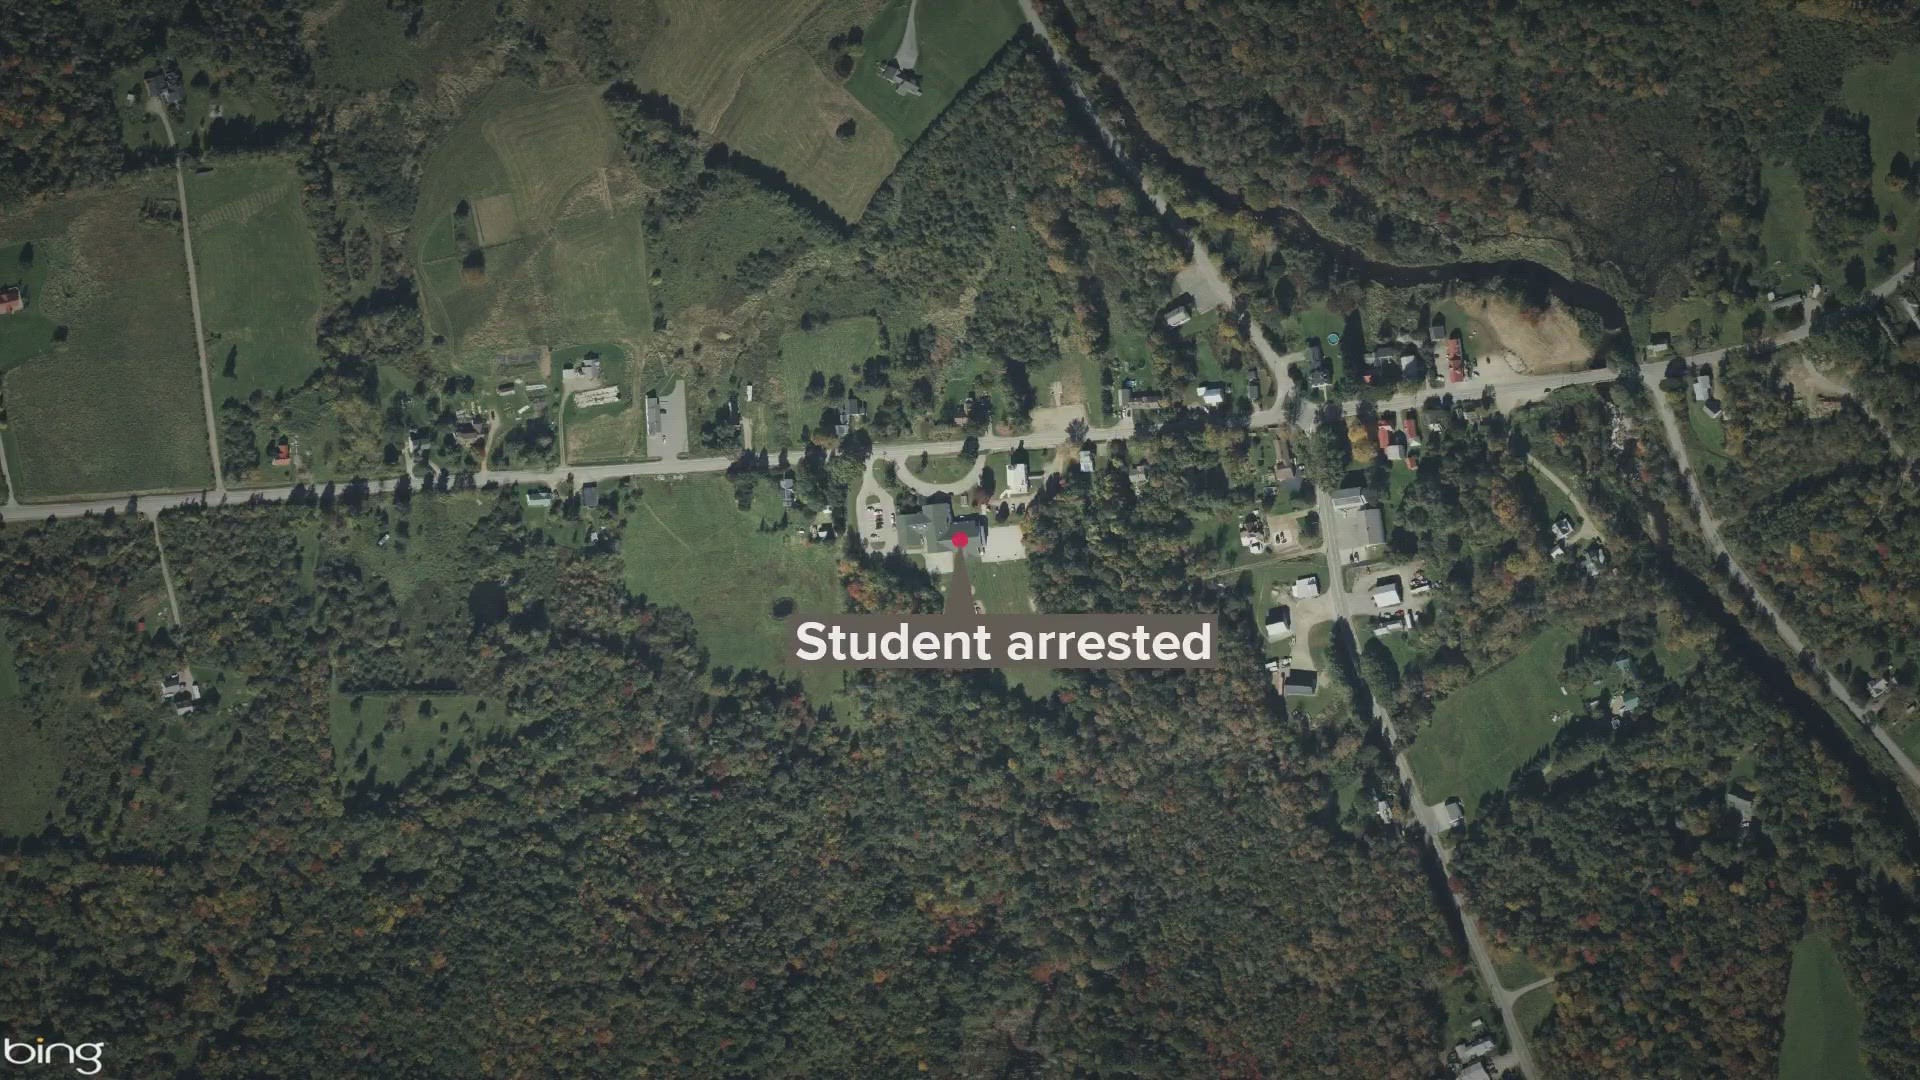 The incident happened shortly before 9 a.m. Friday at Monroe Elementary School, according to a release from the Waldo County Sheriff's Office.